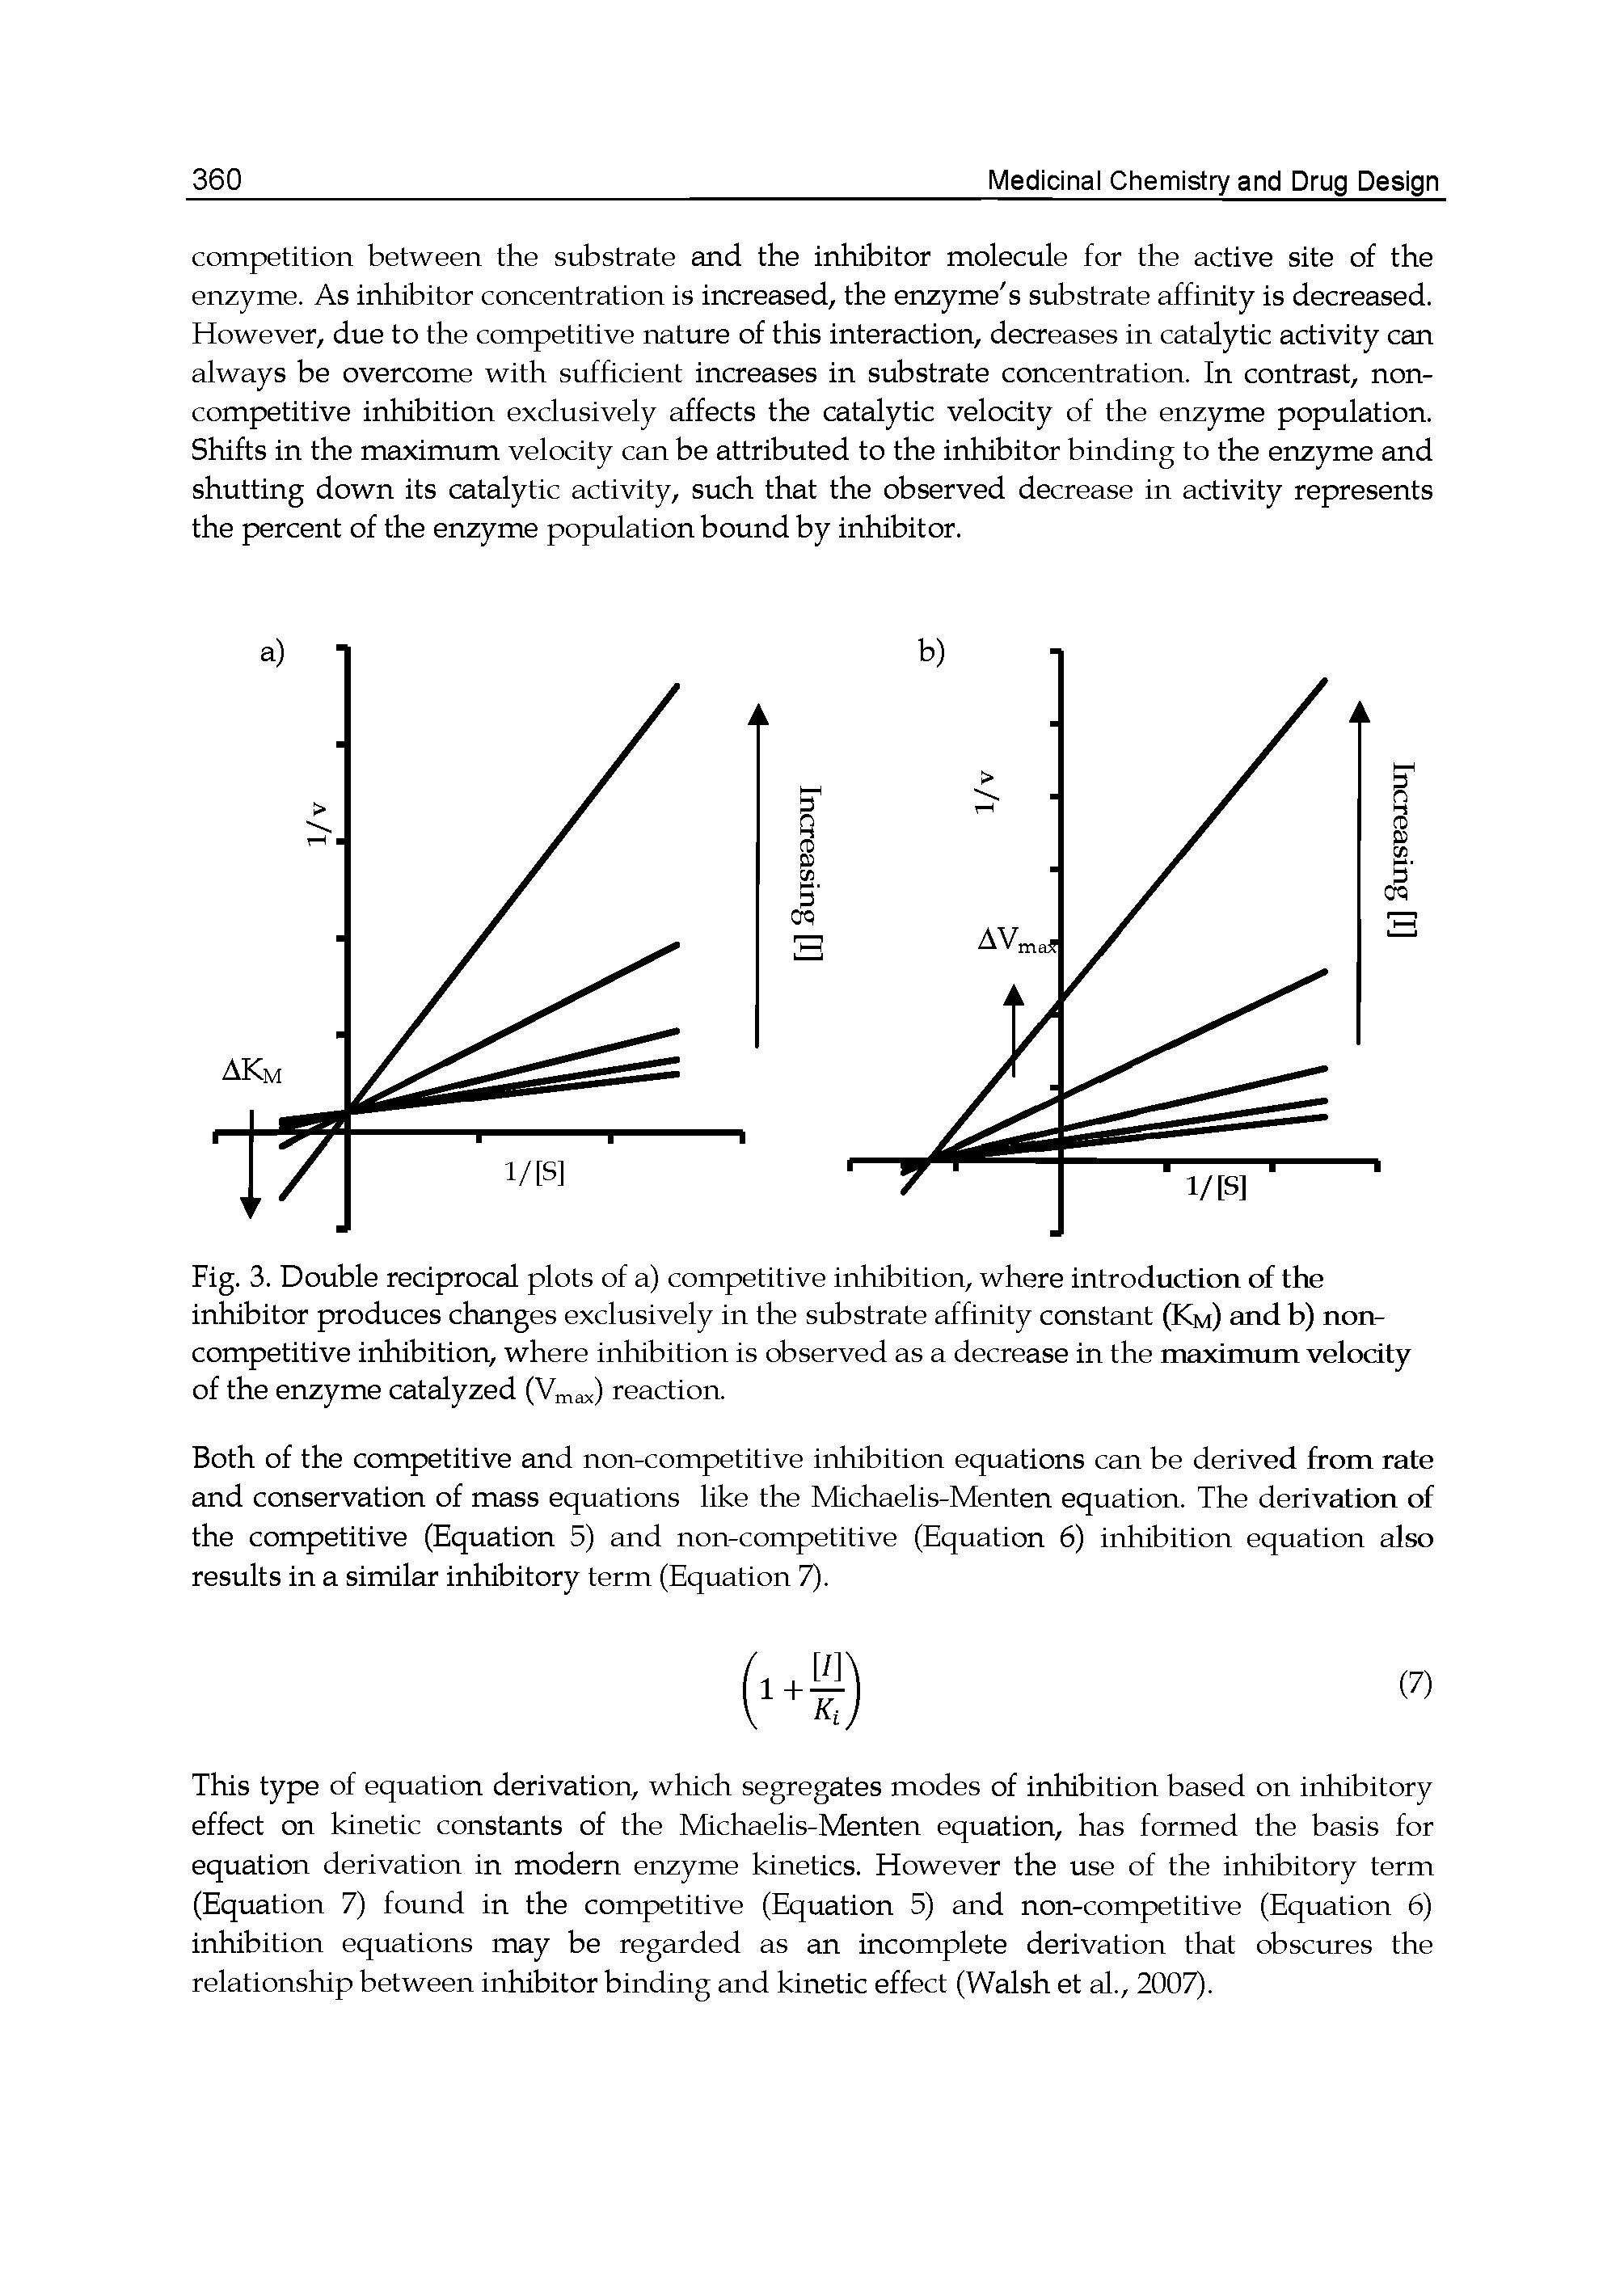 Fig. 3. Double reciprocal plots of a) competitive inhibition, where introduction of the inhibitor produces changes exclusively in the substrate affinity constant (Km) and b) noncompetitive inhibition, where inhibition is observed as a decrease in the maximum velocity of the enzyme catalyzed (Vm x) reaction...